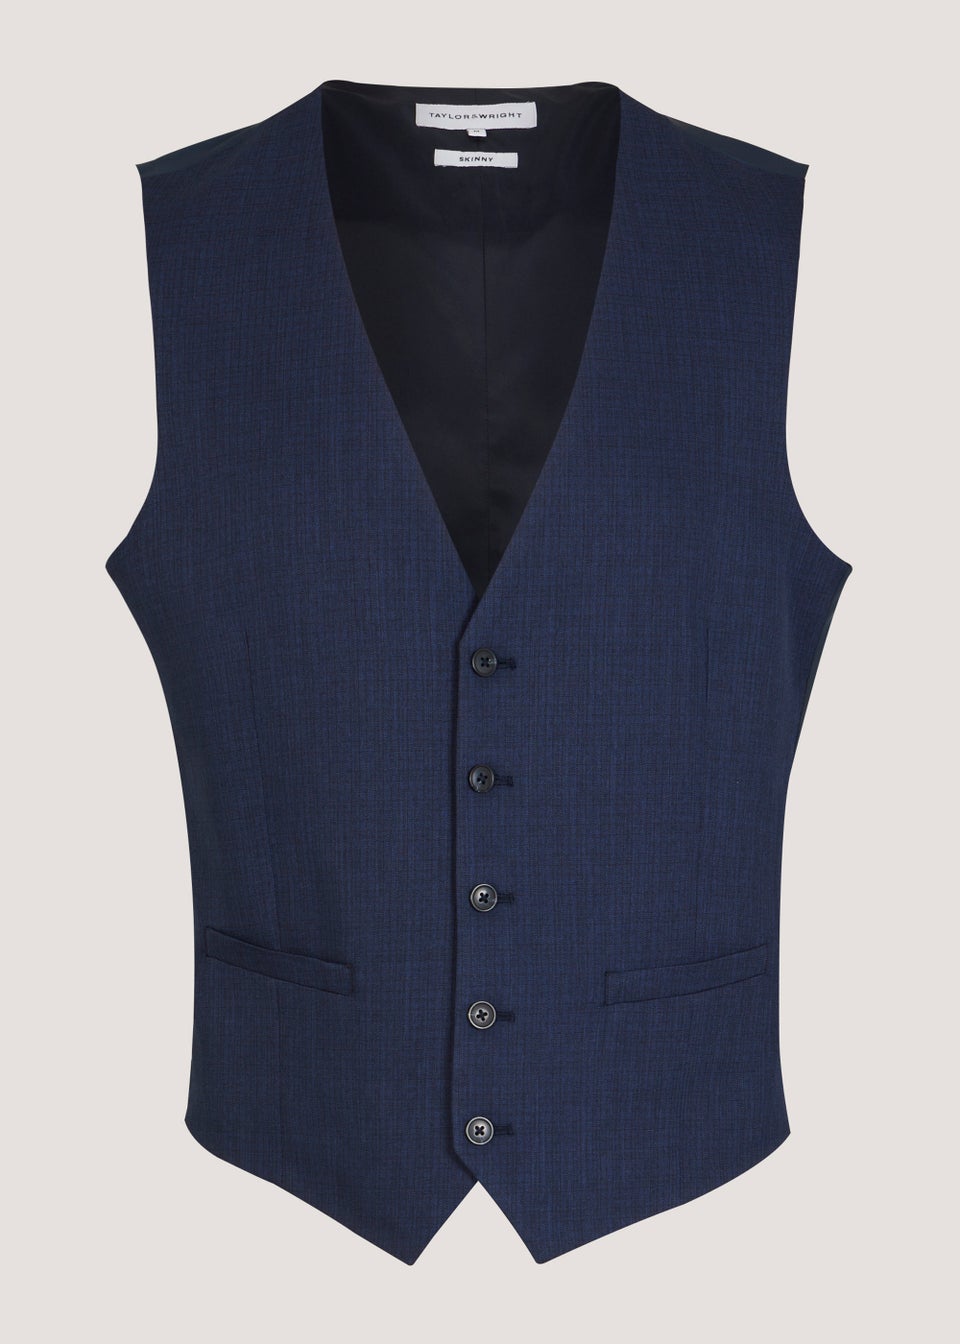 Taylor & Wright Cooper Navy Suit Waistcoat